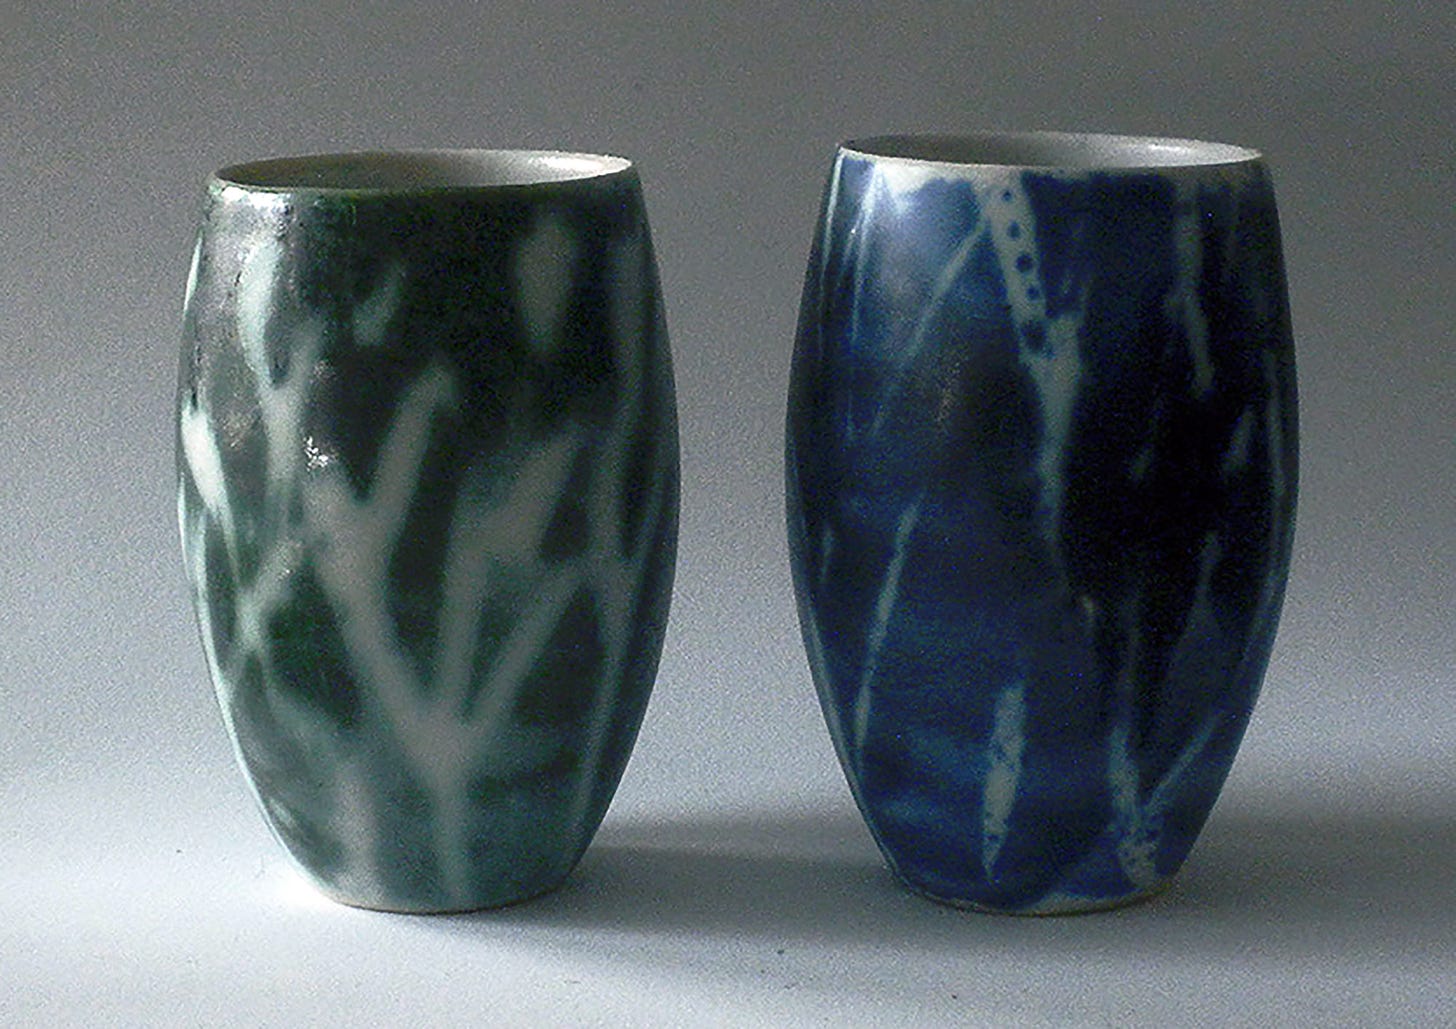 Two slip cast Tumbler are simple forms of gently curved ceramic drinking vessels glazed in white and then brushed with wax branches and brushed again with with fluid interactive ceramic decorating color. One tumbler is brushed in green and the other in blue, The interaction between the flux in the decorating colors and the white glaze created a nature-made effect